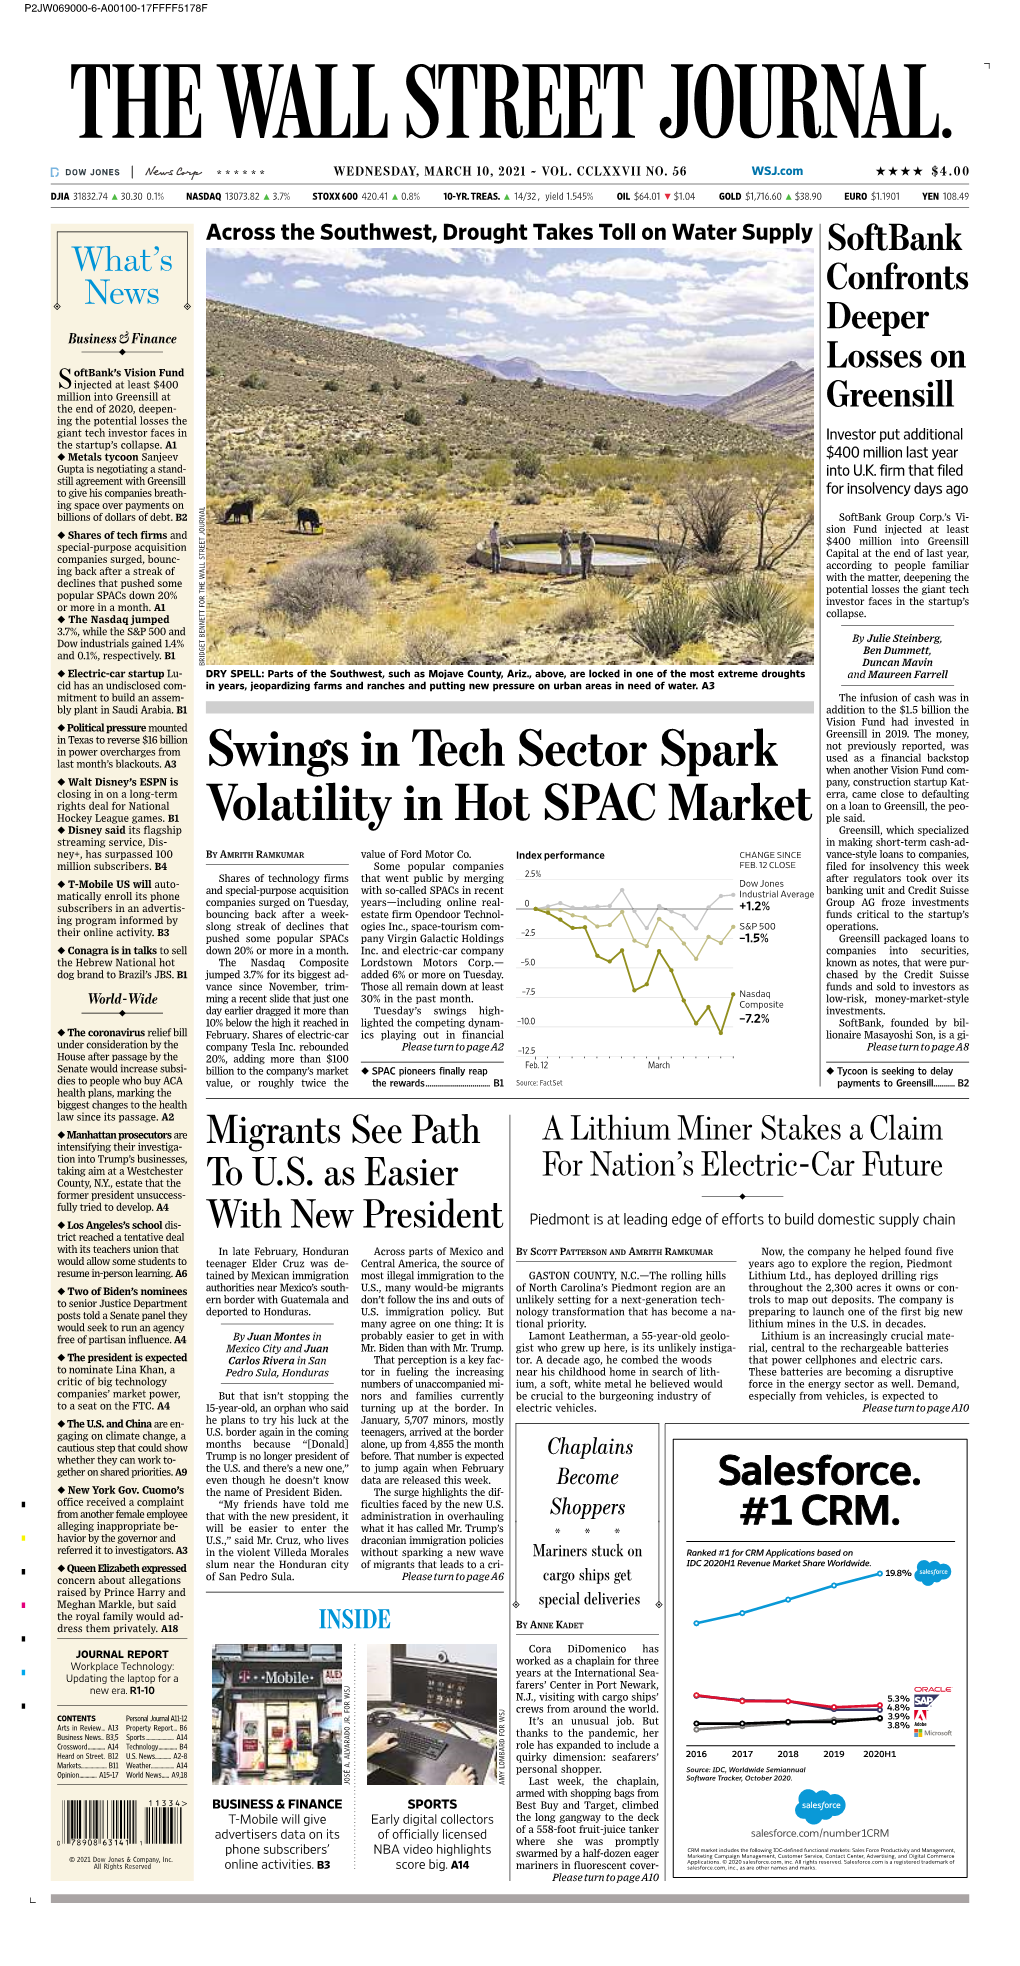 Swings in Tech Sector Spark Volatility in Hot SPAC Market